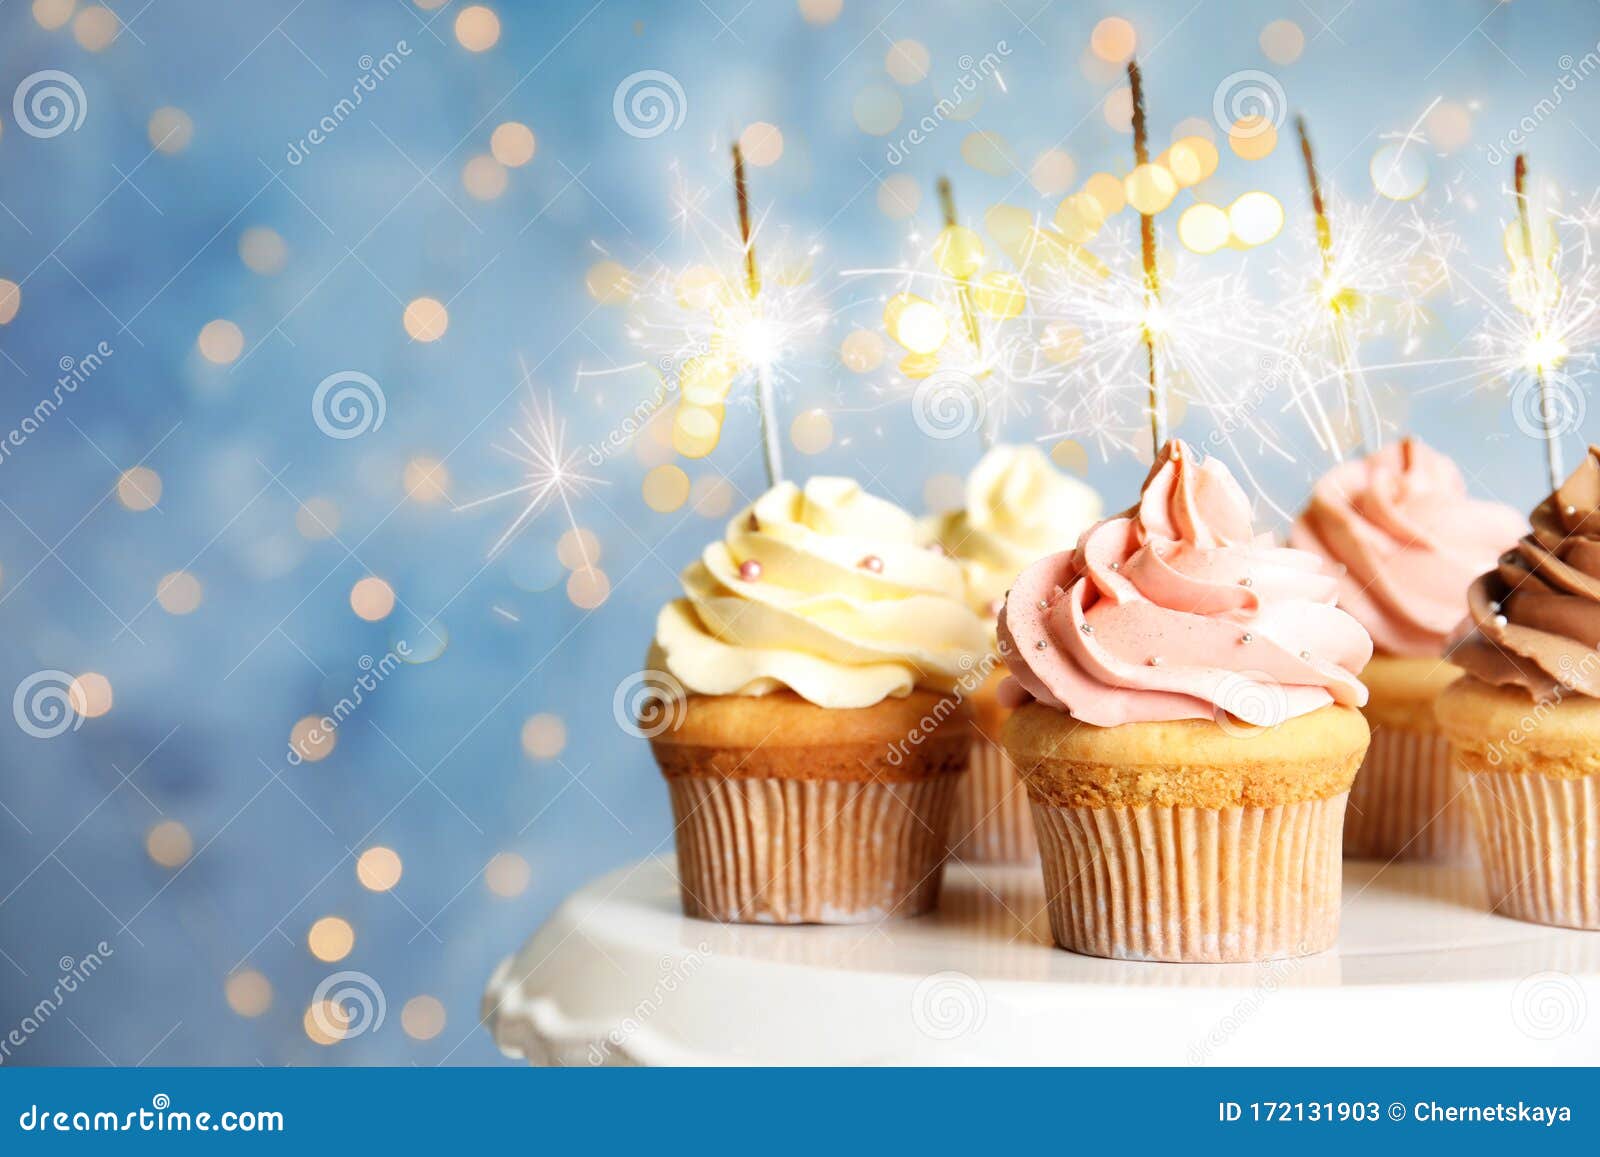 delicious birthday cupcakes with sparklers on stand against blurred background